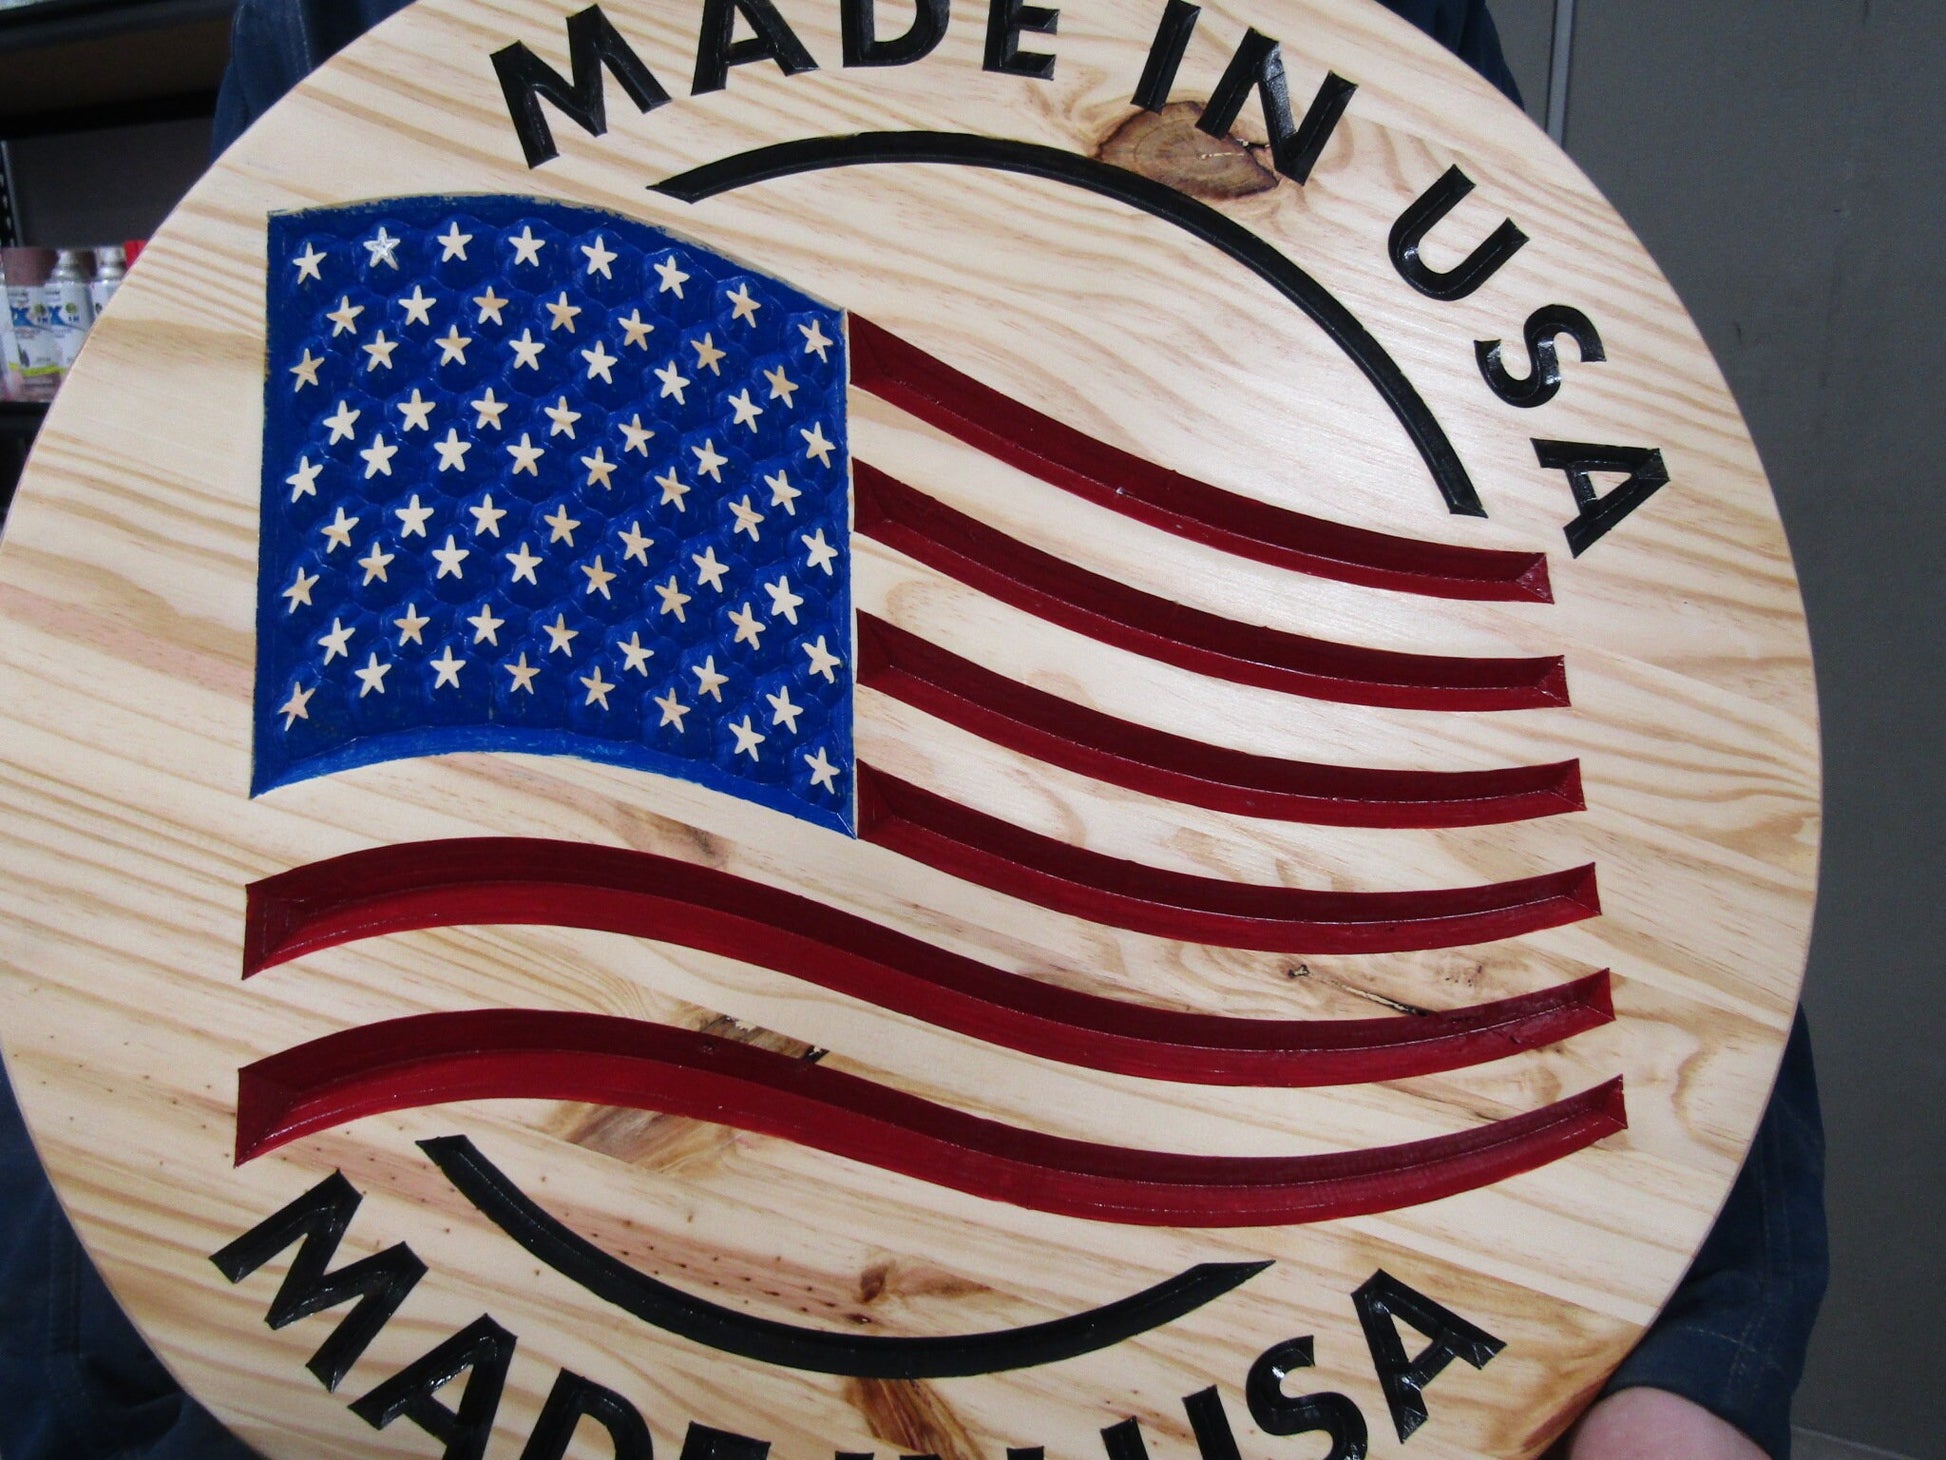 Wooden Engraved Routed Made In Usa Color Filled Red White Blue Round Natural Wood Circle Sign Display Handmade Decor Signage Commerical Use